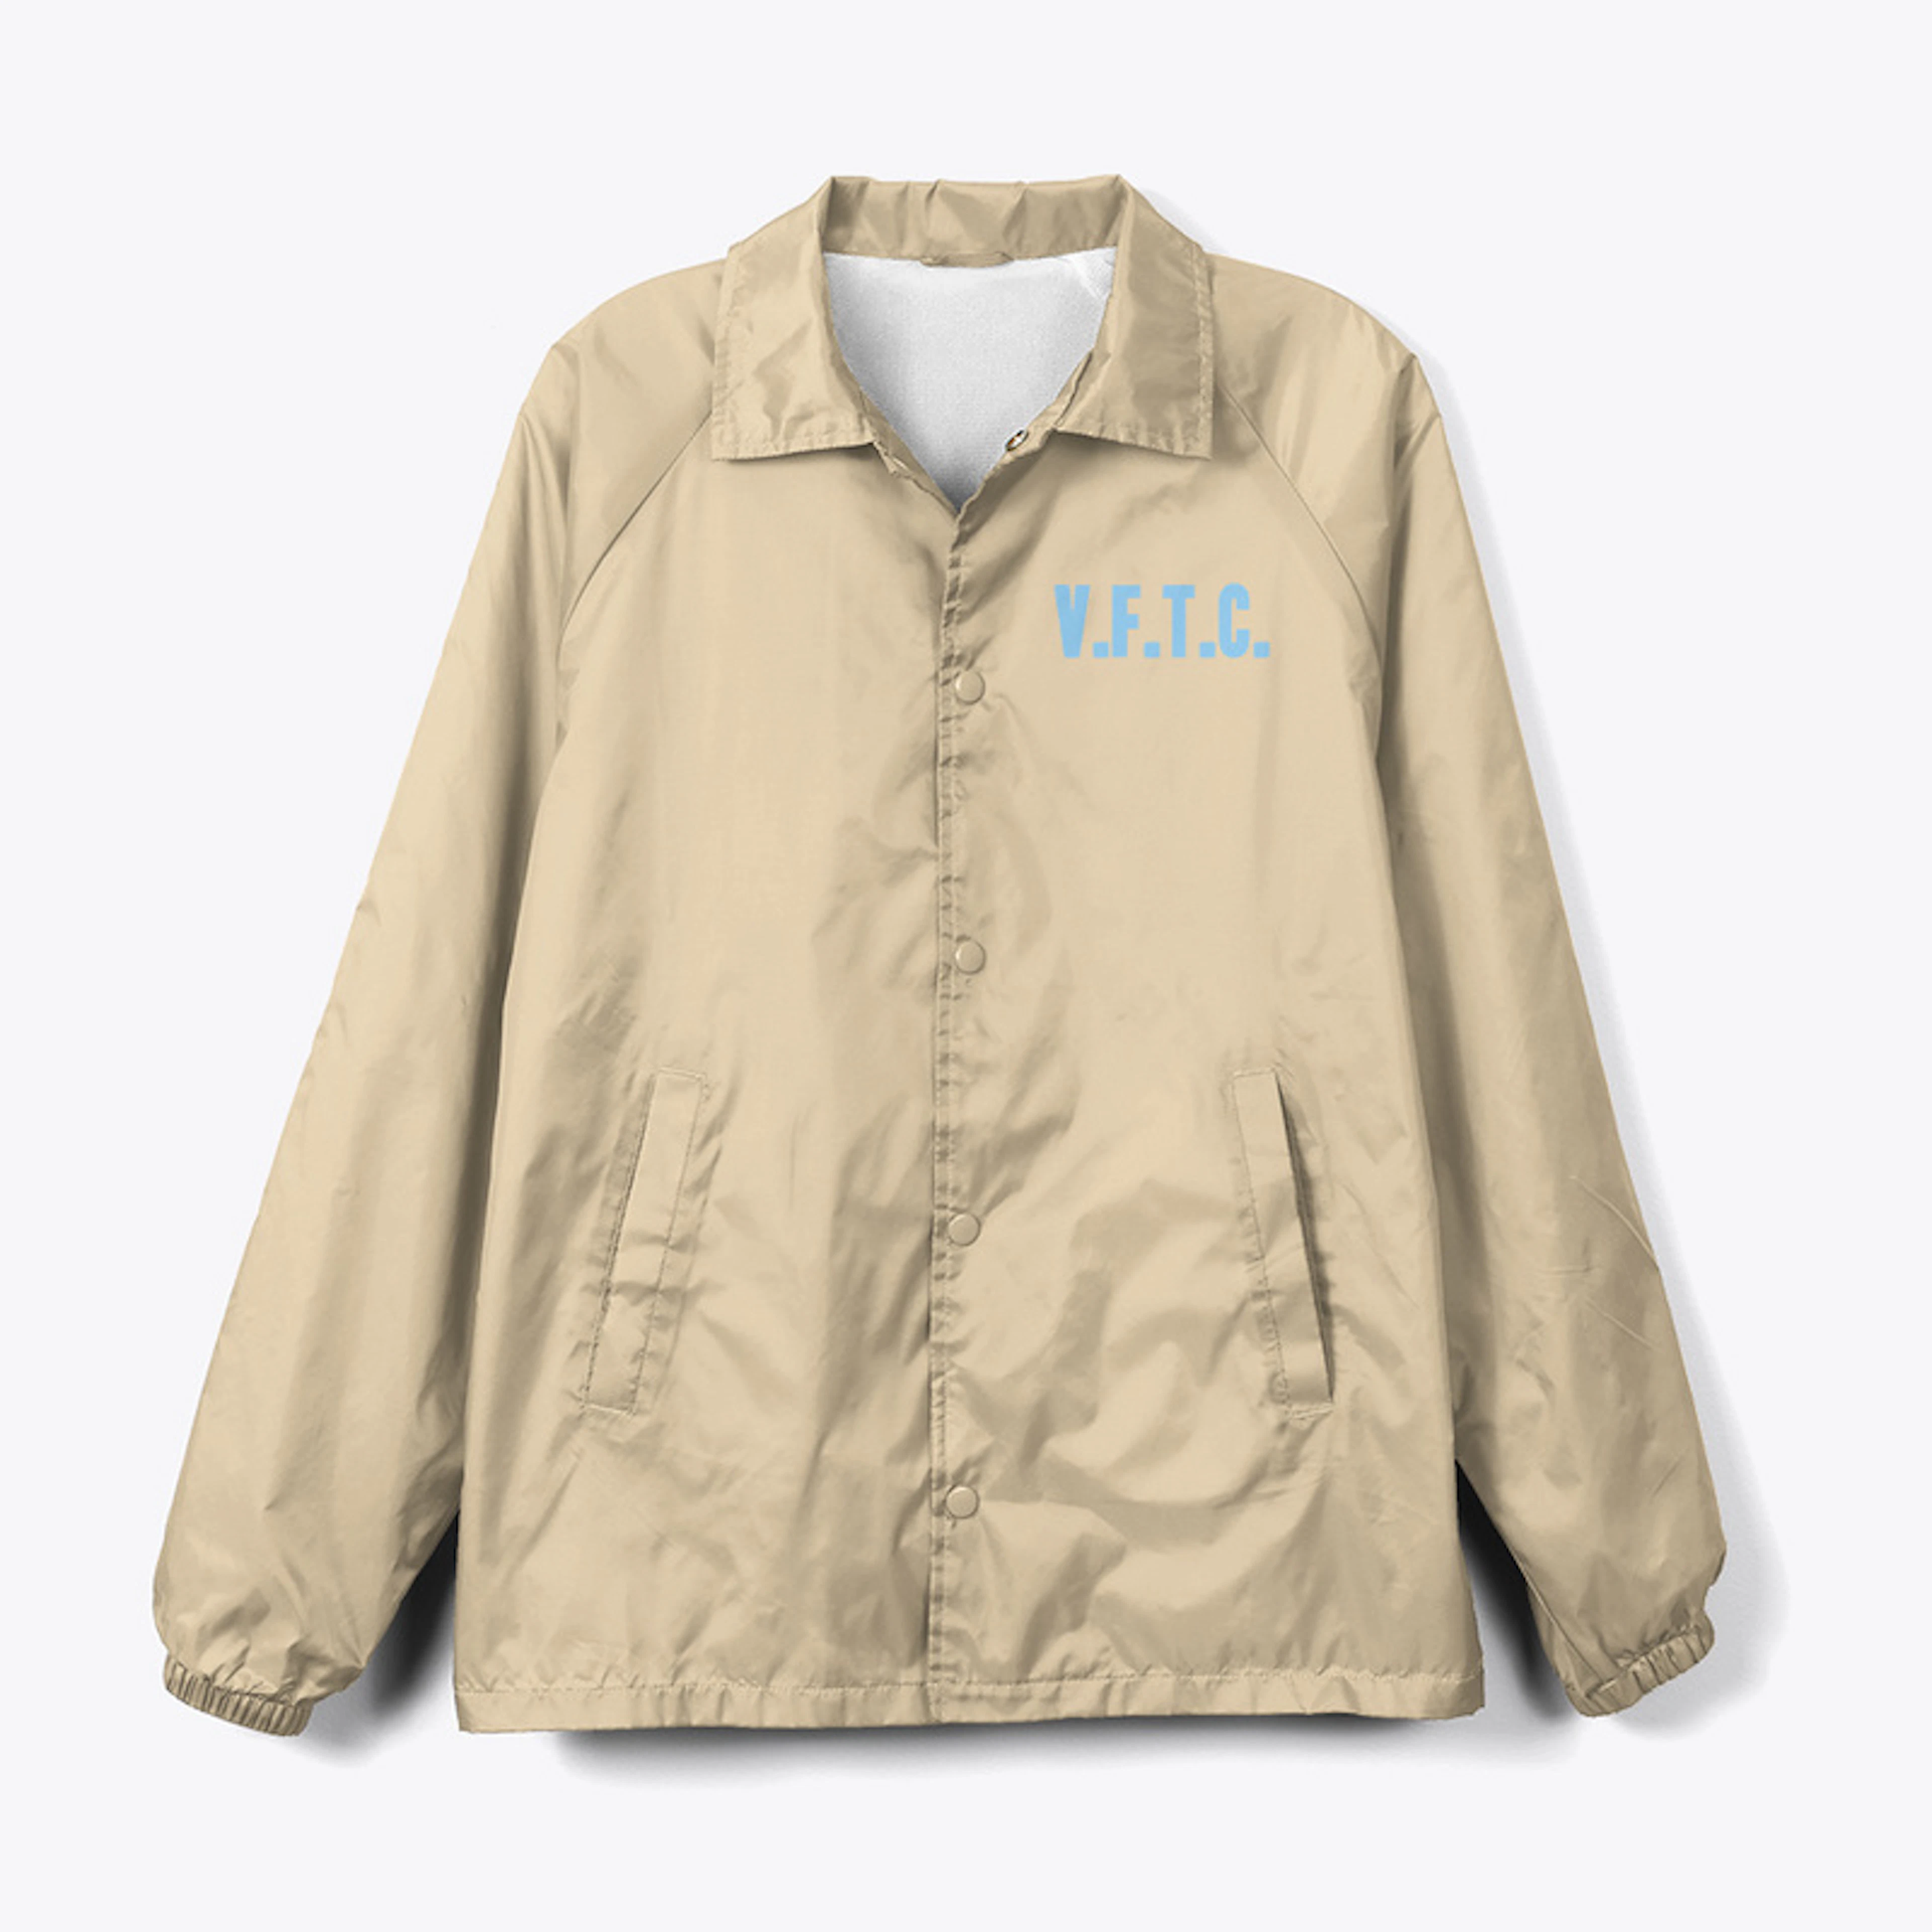 V.F.T.C. Coach Jacket with Couch Heads